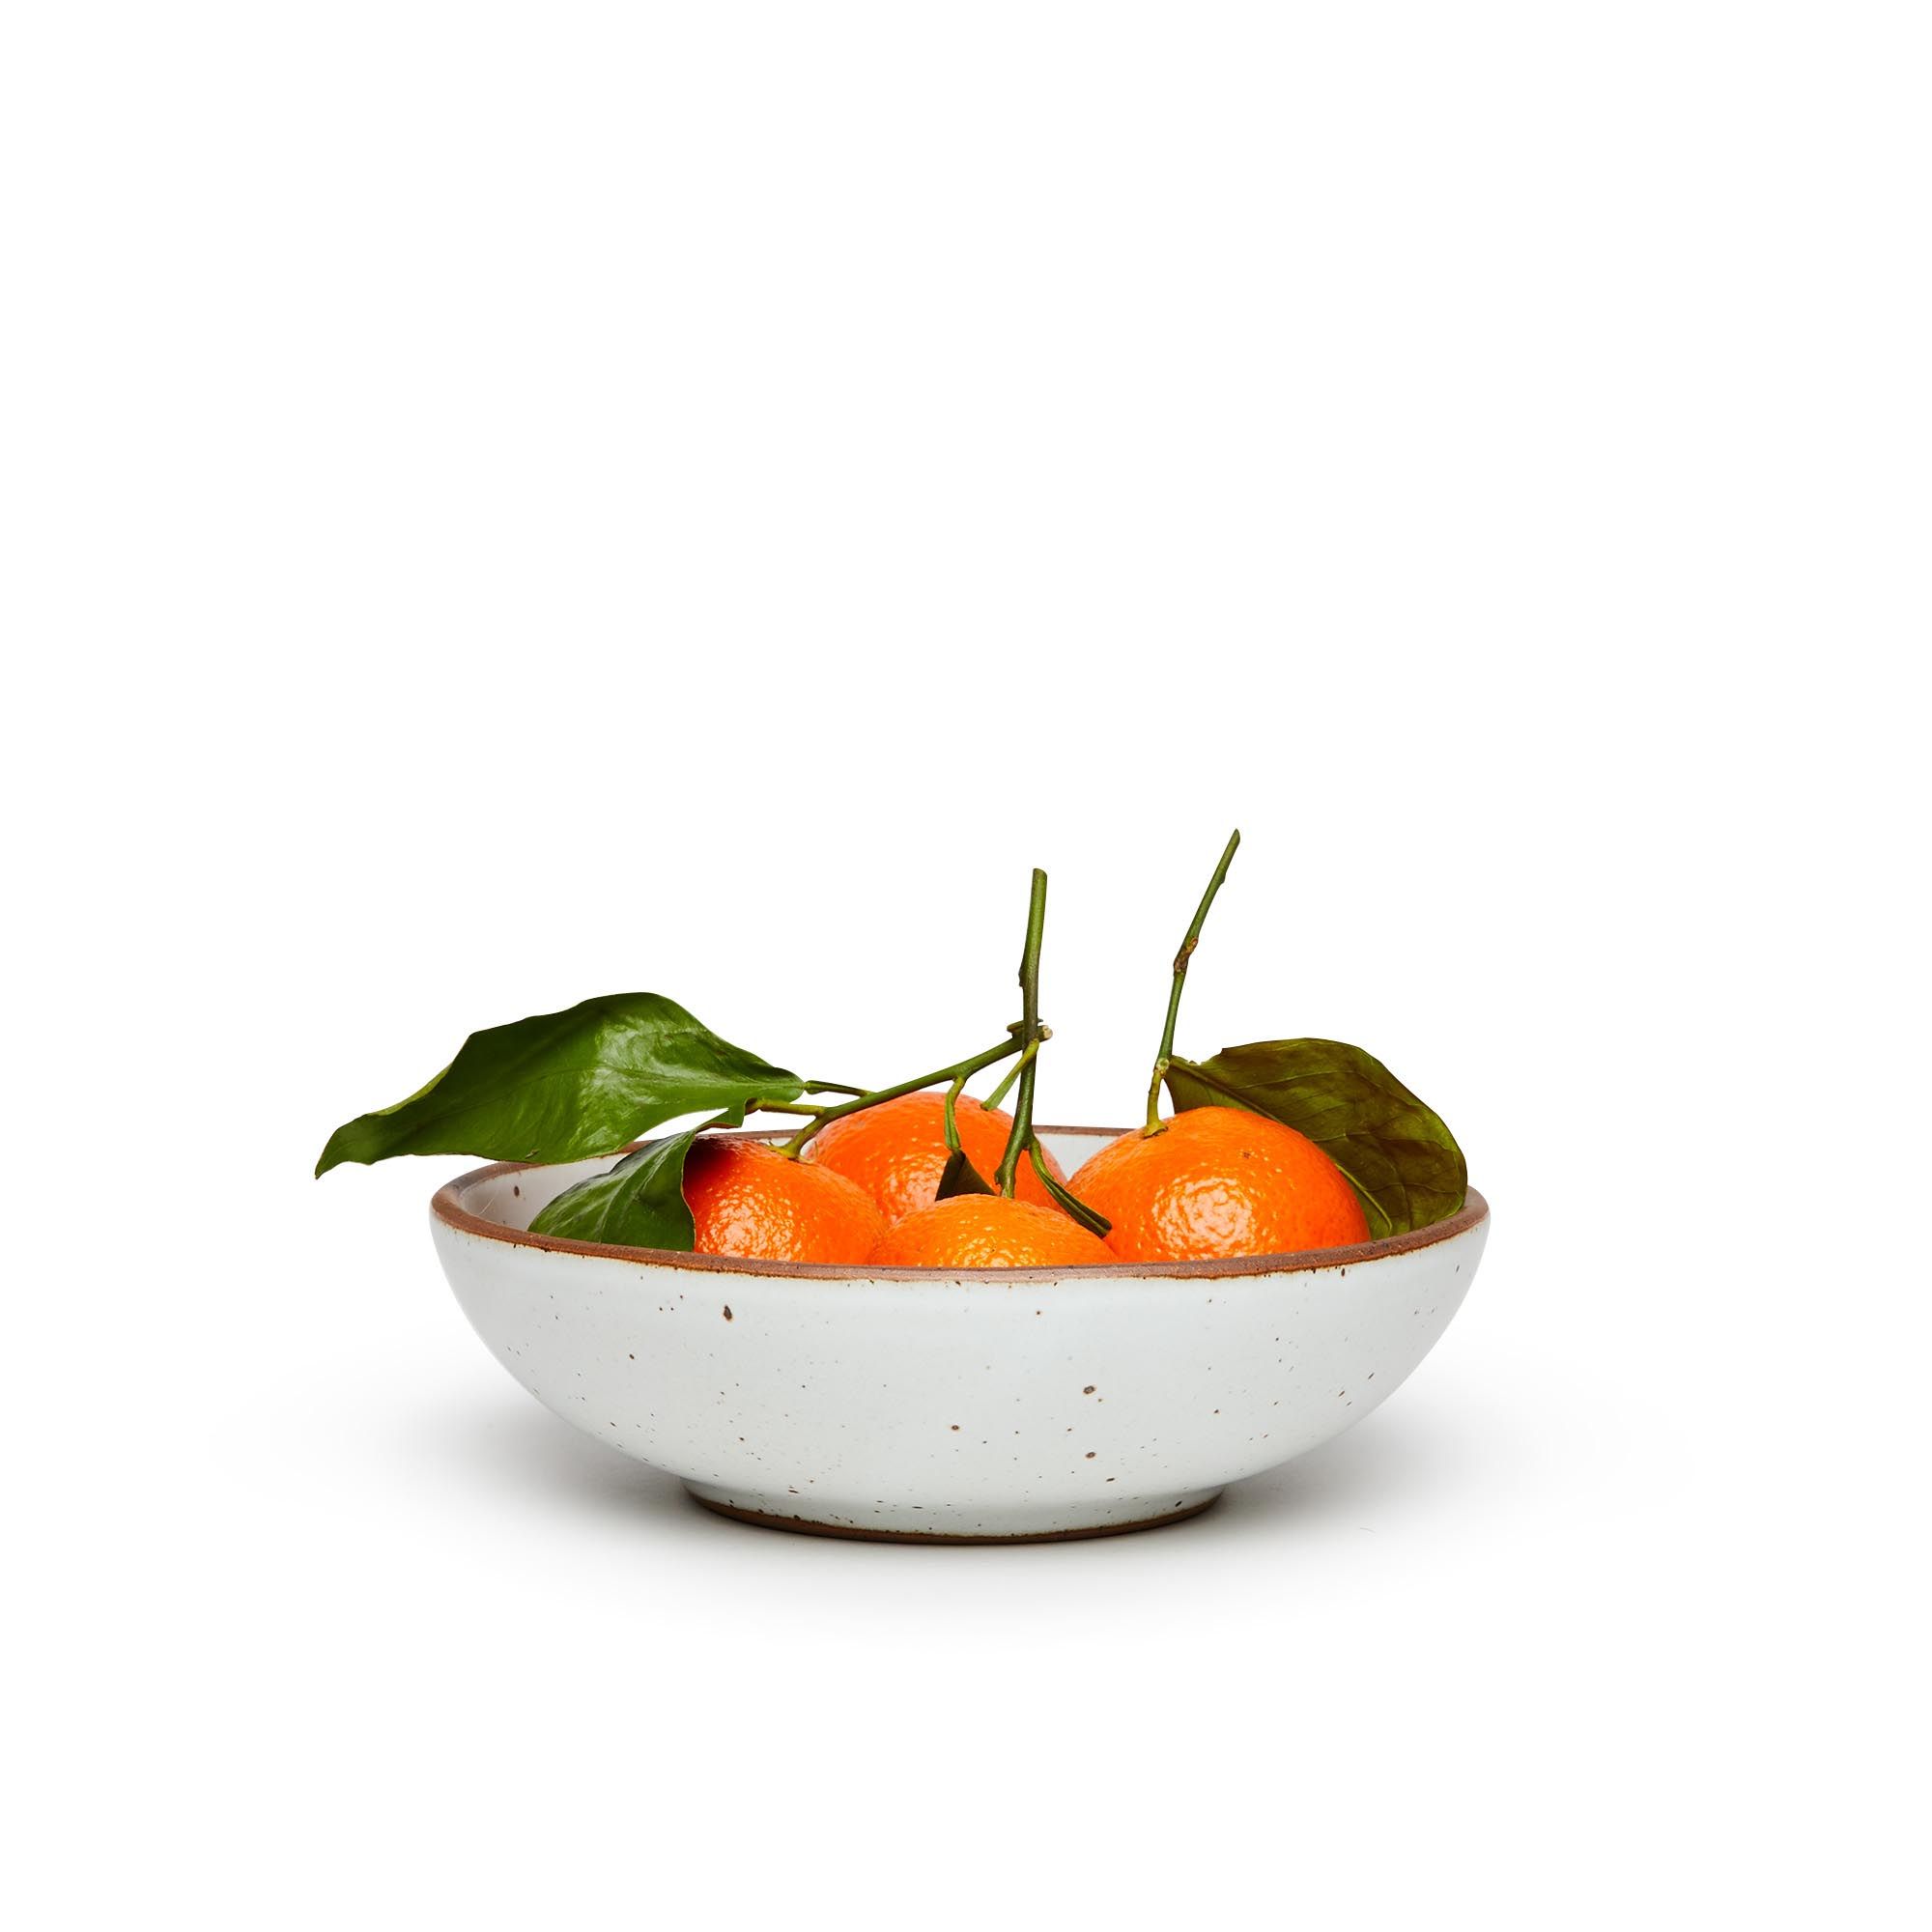 Mandarins in a dinner-sized shallow ceramic bowl in a cool white color featuring iron speckles and an unglazed rim